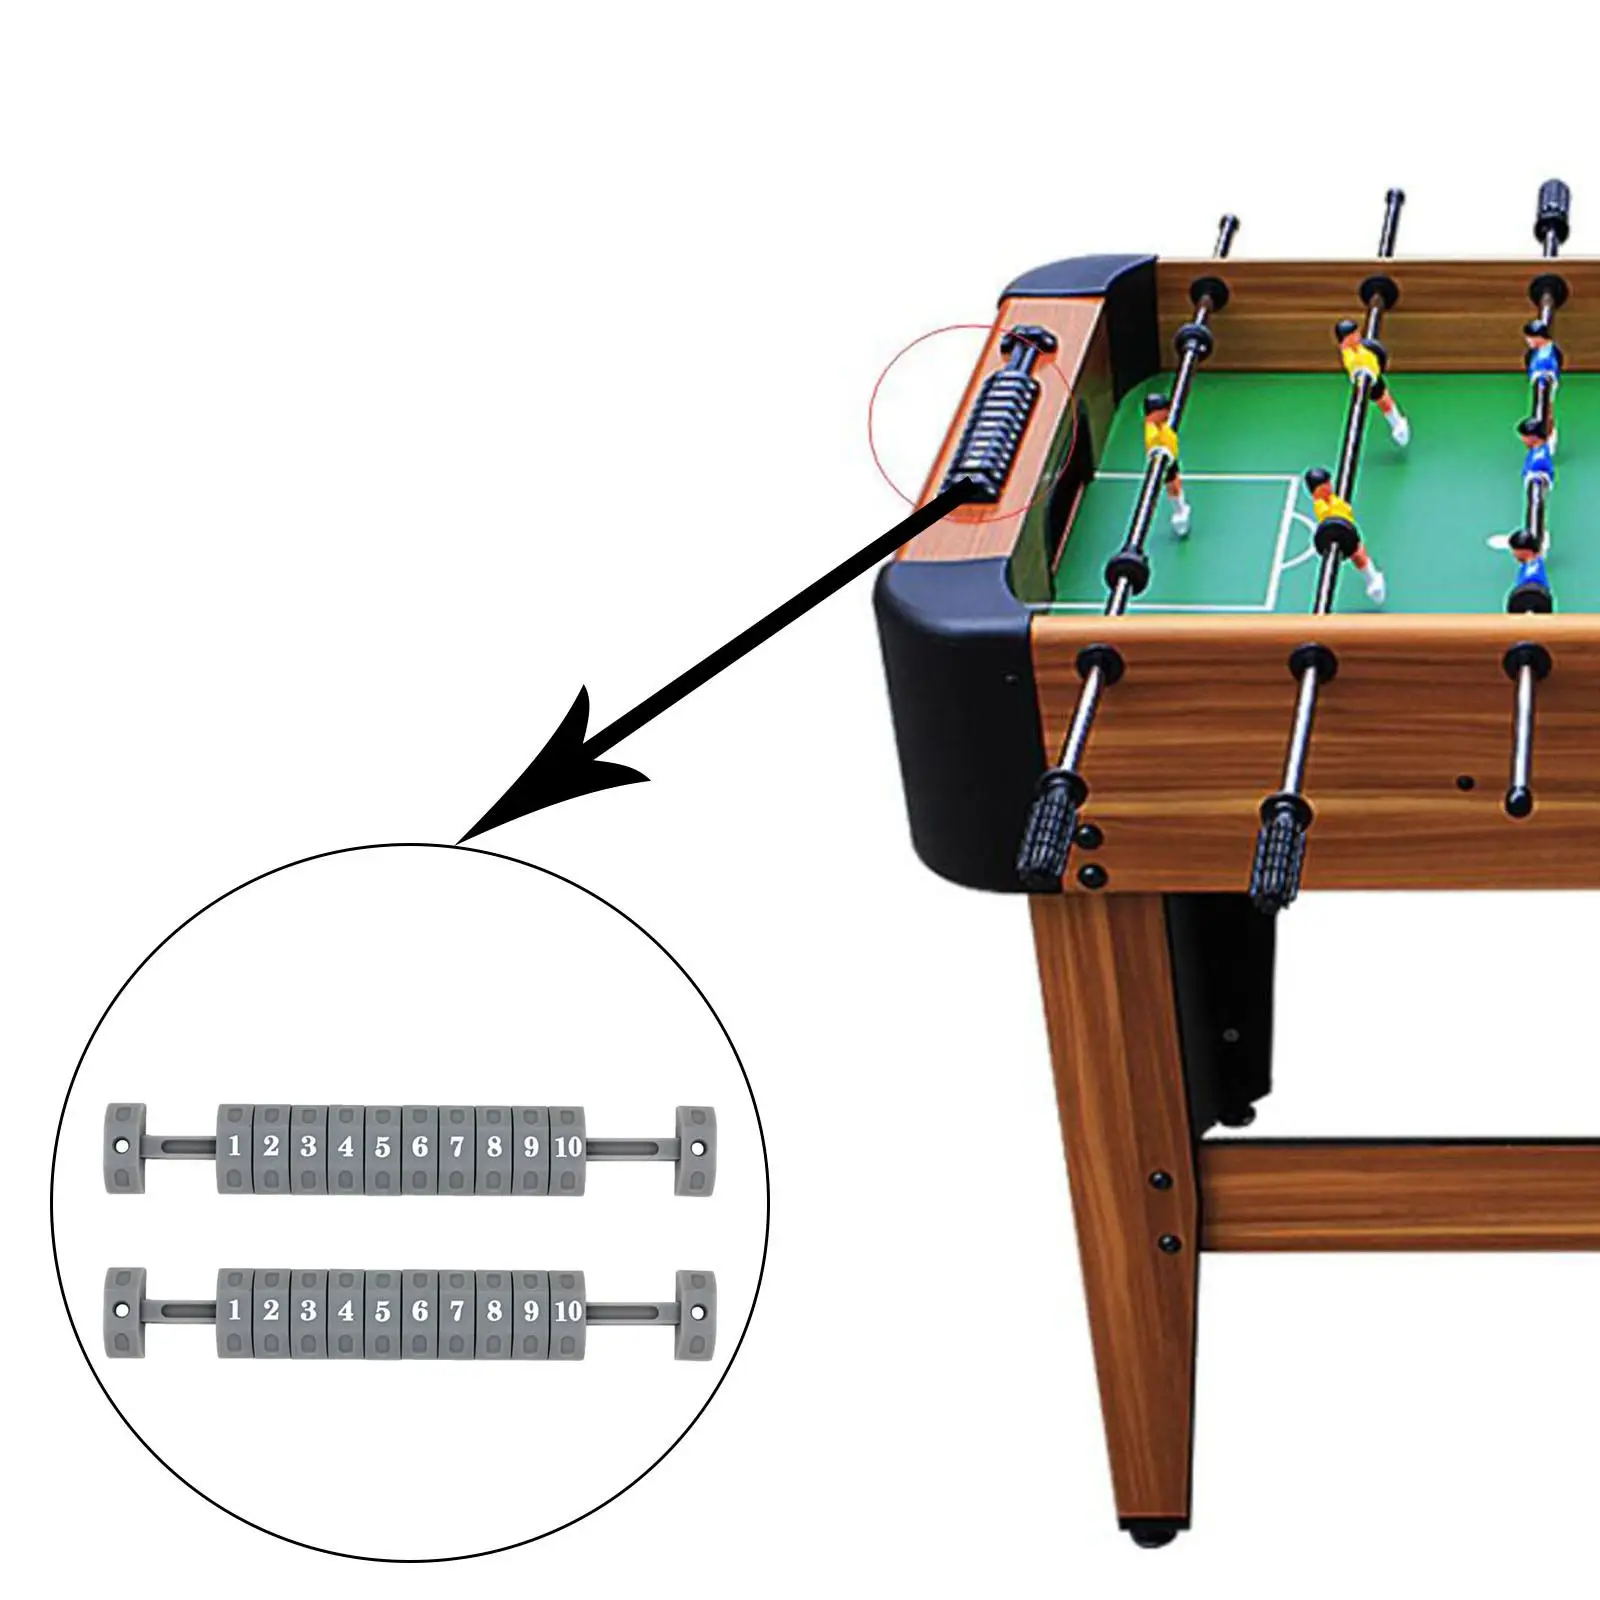 2 Pieces Foosball Counter Scoring Units Scoreboard 10 Numbers for